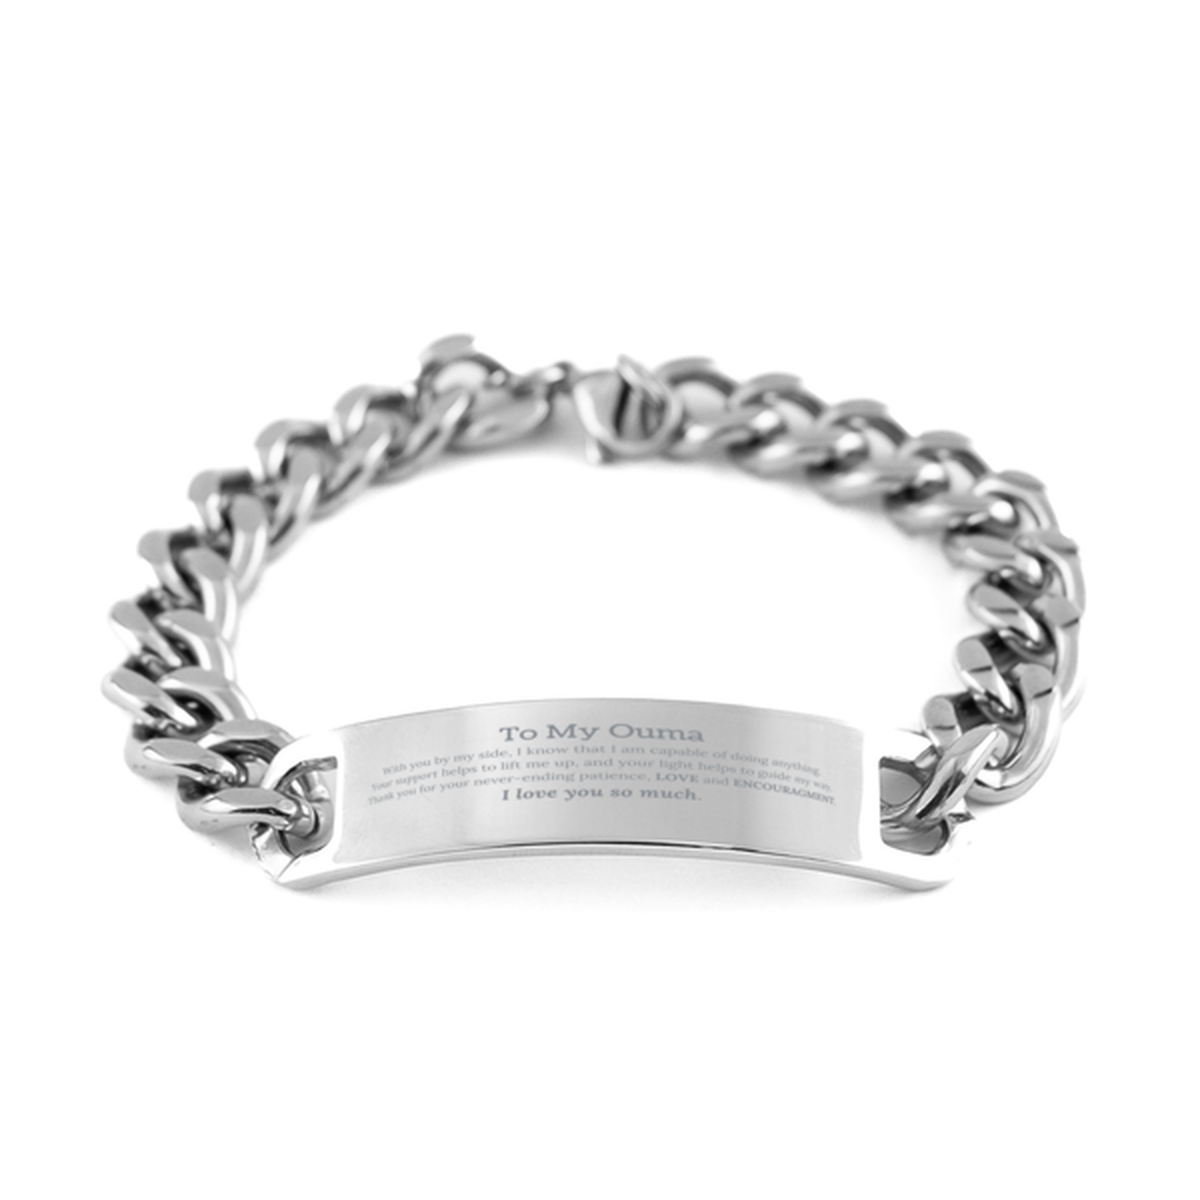 Appreciation Ouma Cuban Chain Stainless Steel Bracelet Gifts, To My Ouma Birthday Christmas Wedding Keepsake Gifts for Ouma With you by my side, I know that I am capable of doing anything. I love you so much